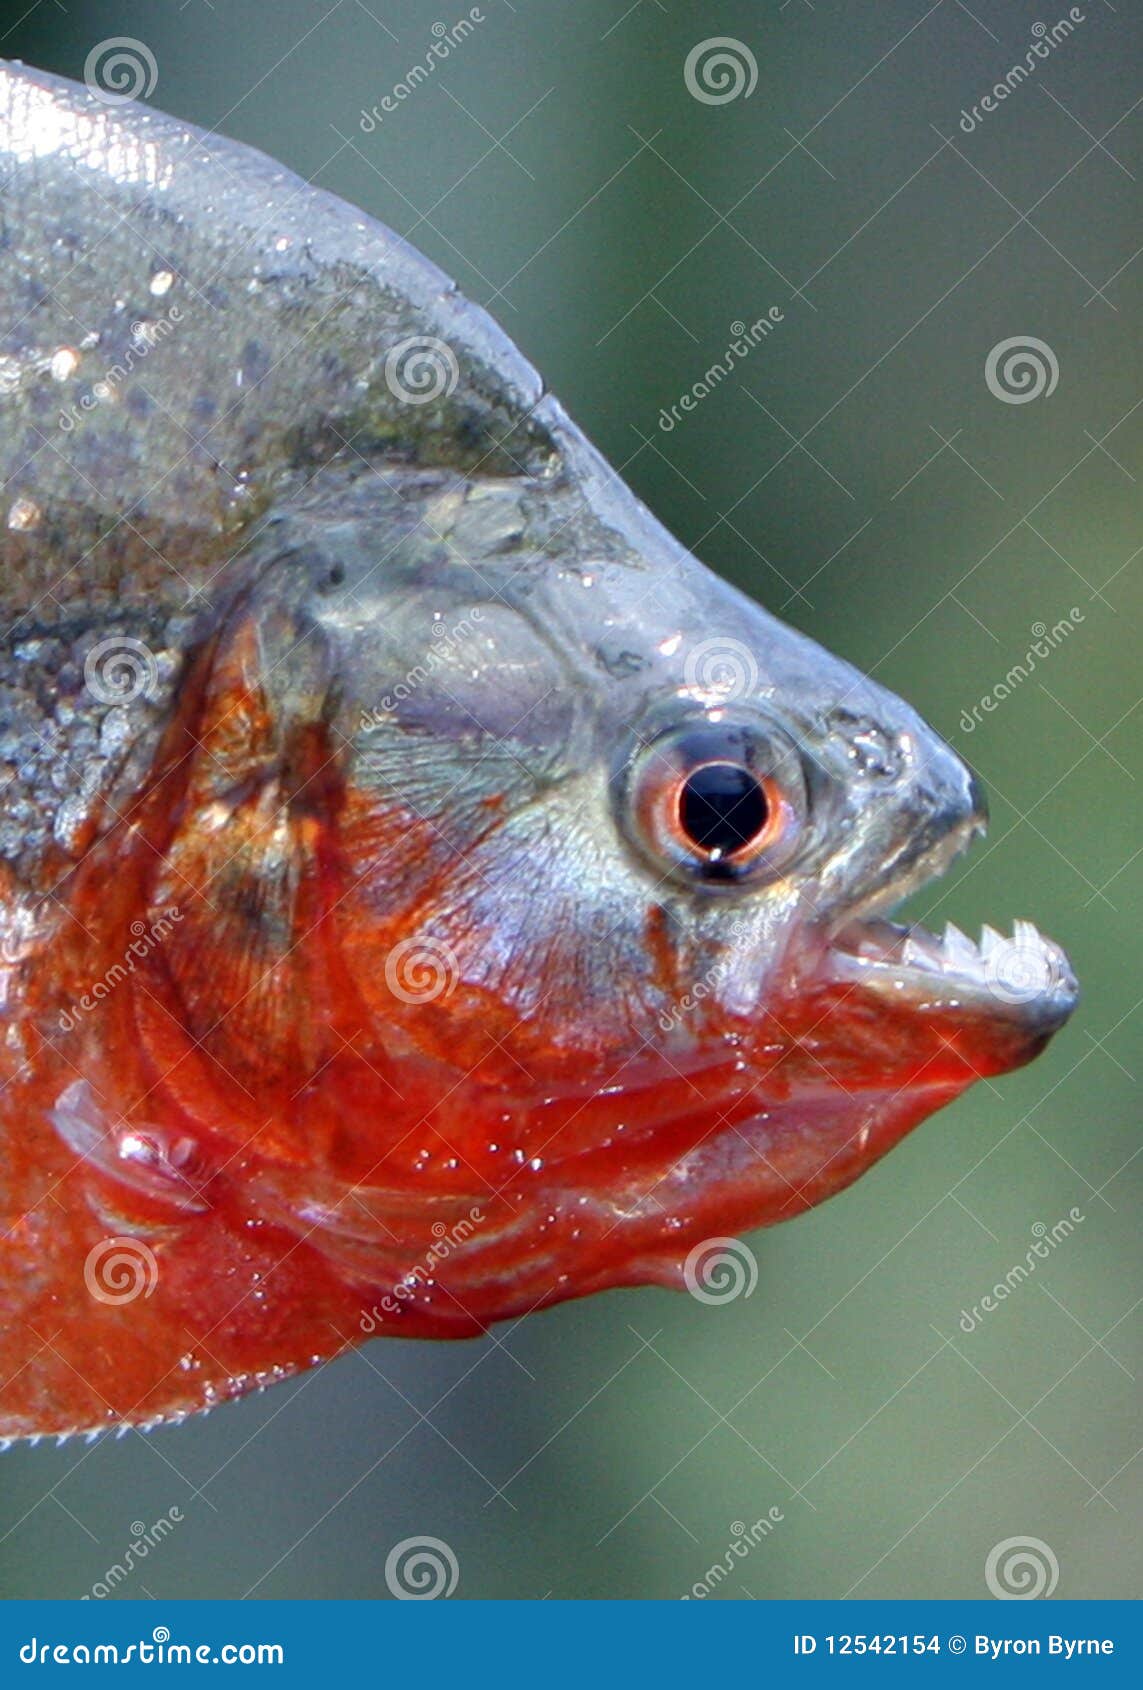 piranha close up with teeth exposed in the amazon